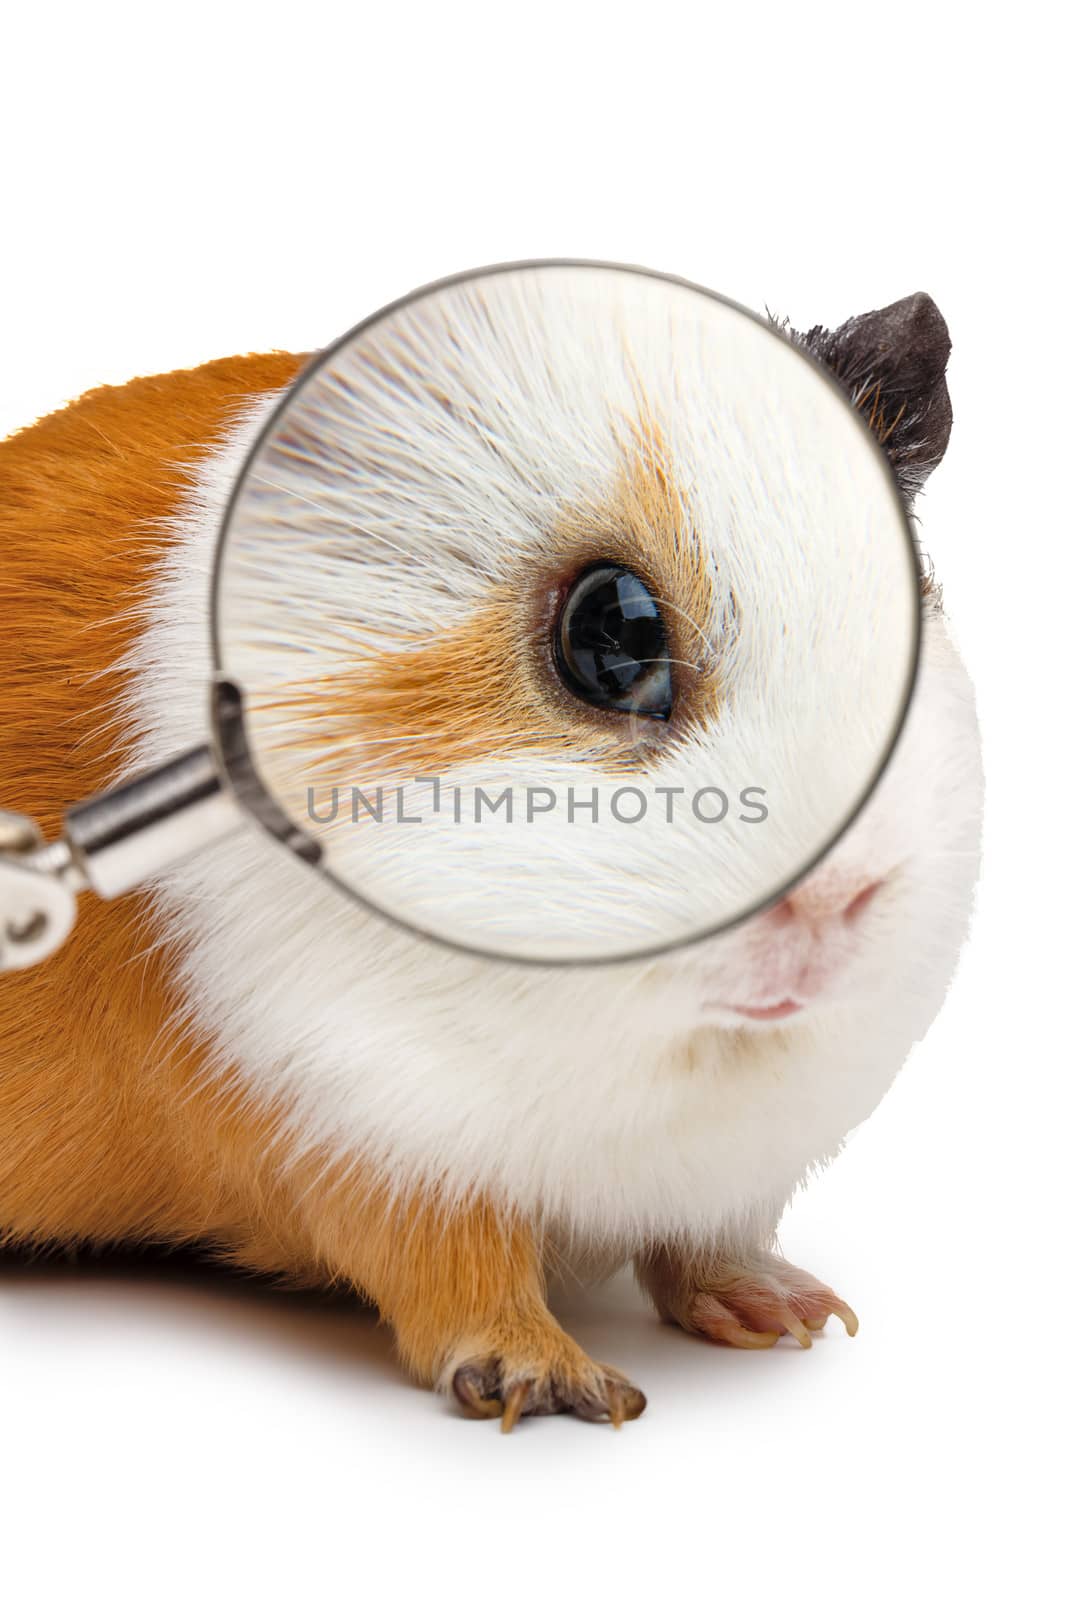 Guinea pig looks throught a magnifying glass by Vagengeym